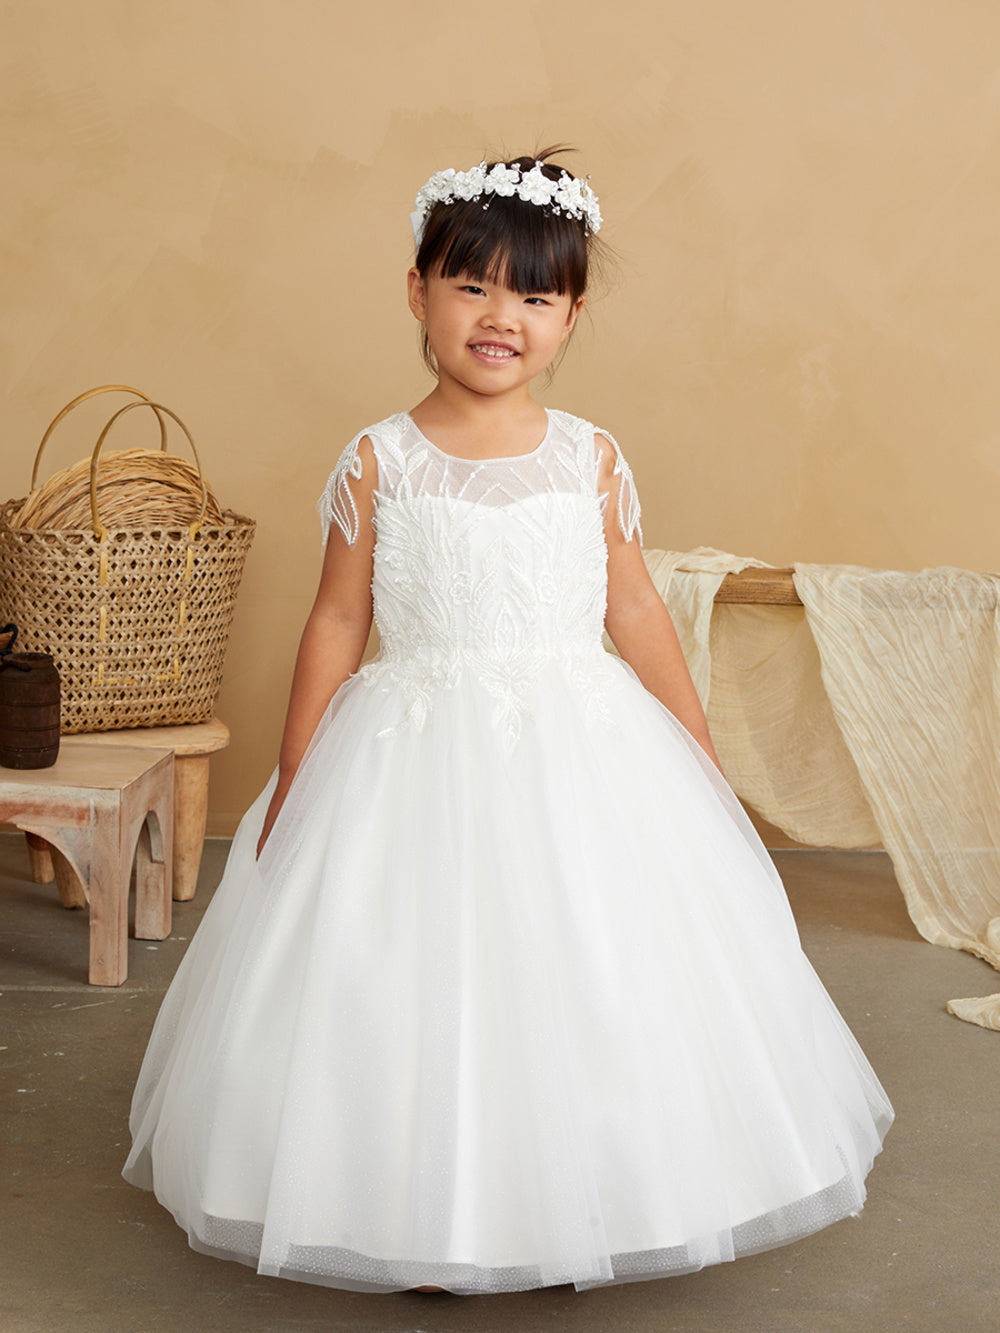 Flowergirl Sequin Applique with Shoulder Accent Dress by TIPTOP KIDS - AS5839